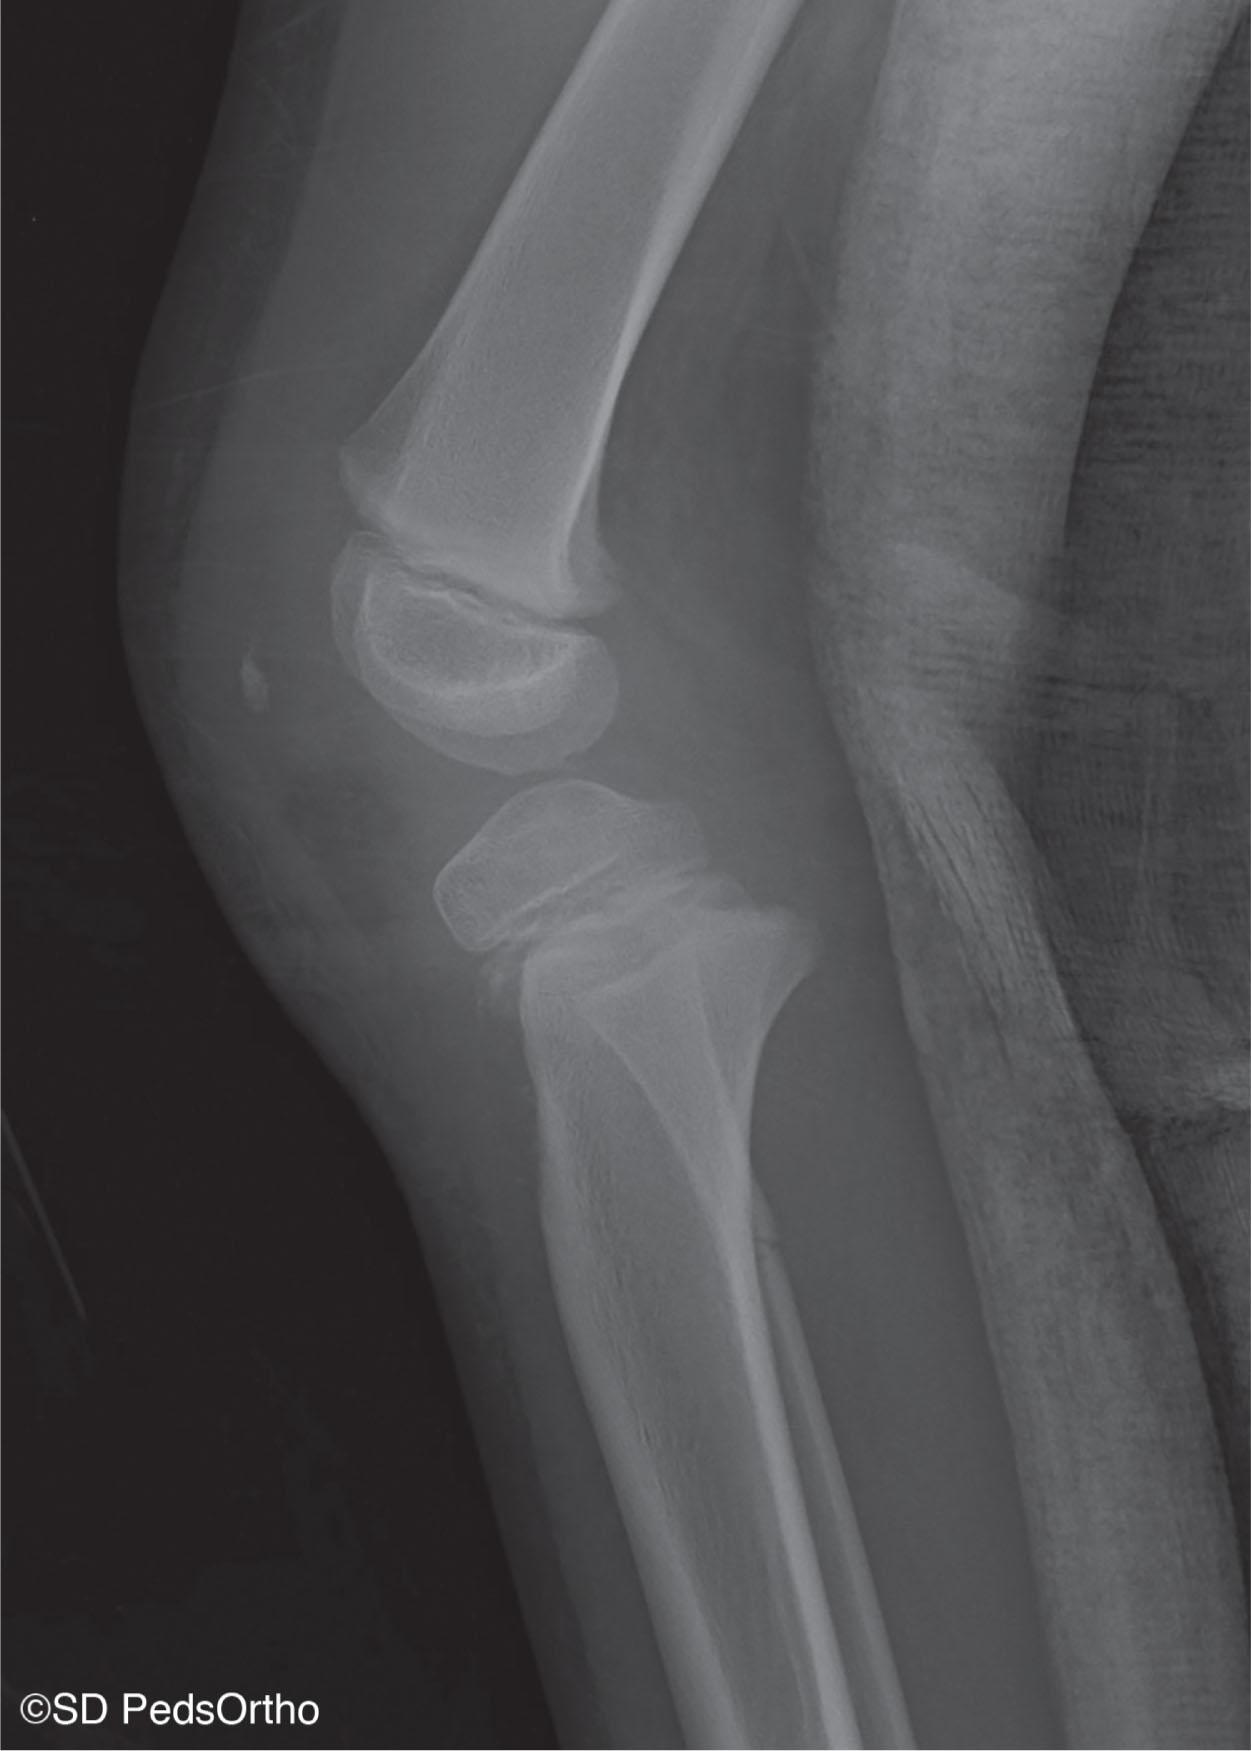 Fig. 12.1, An Extension-Type Proximal Tibial Physeal Fracture. This demonstrates displacement of the proximal tibial metaphysis posteriorly that can lead to injury of the tethered popliteal artery